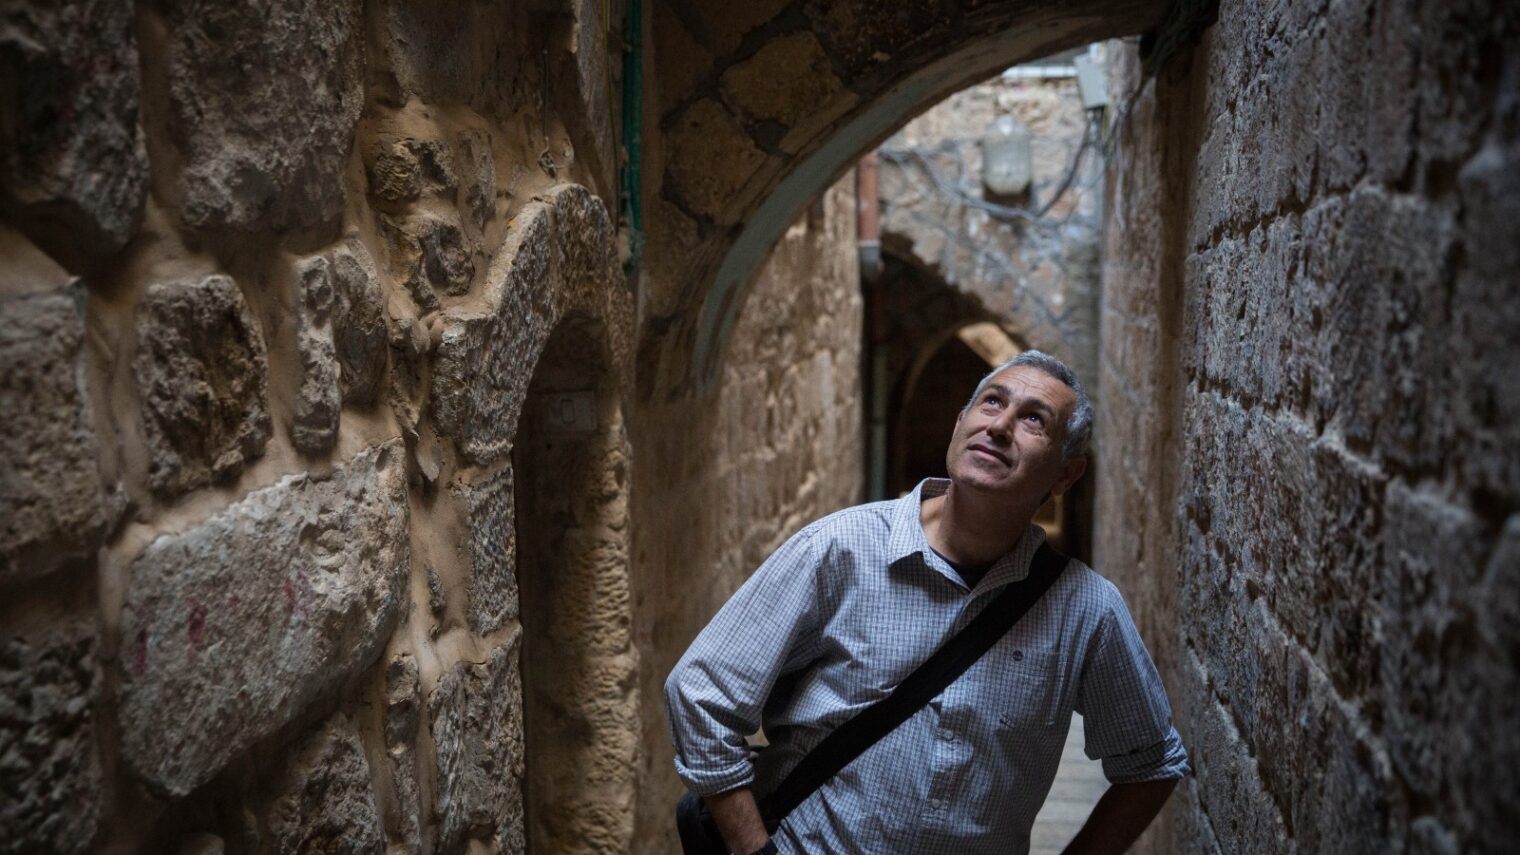 Israeli tour guide Ami Meitav leading a tour in the Old City of Jerusalem. Photo by HadasParush/Flash90